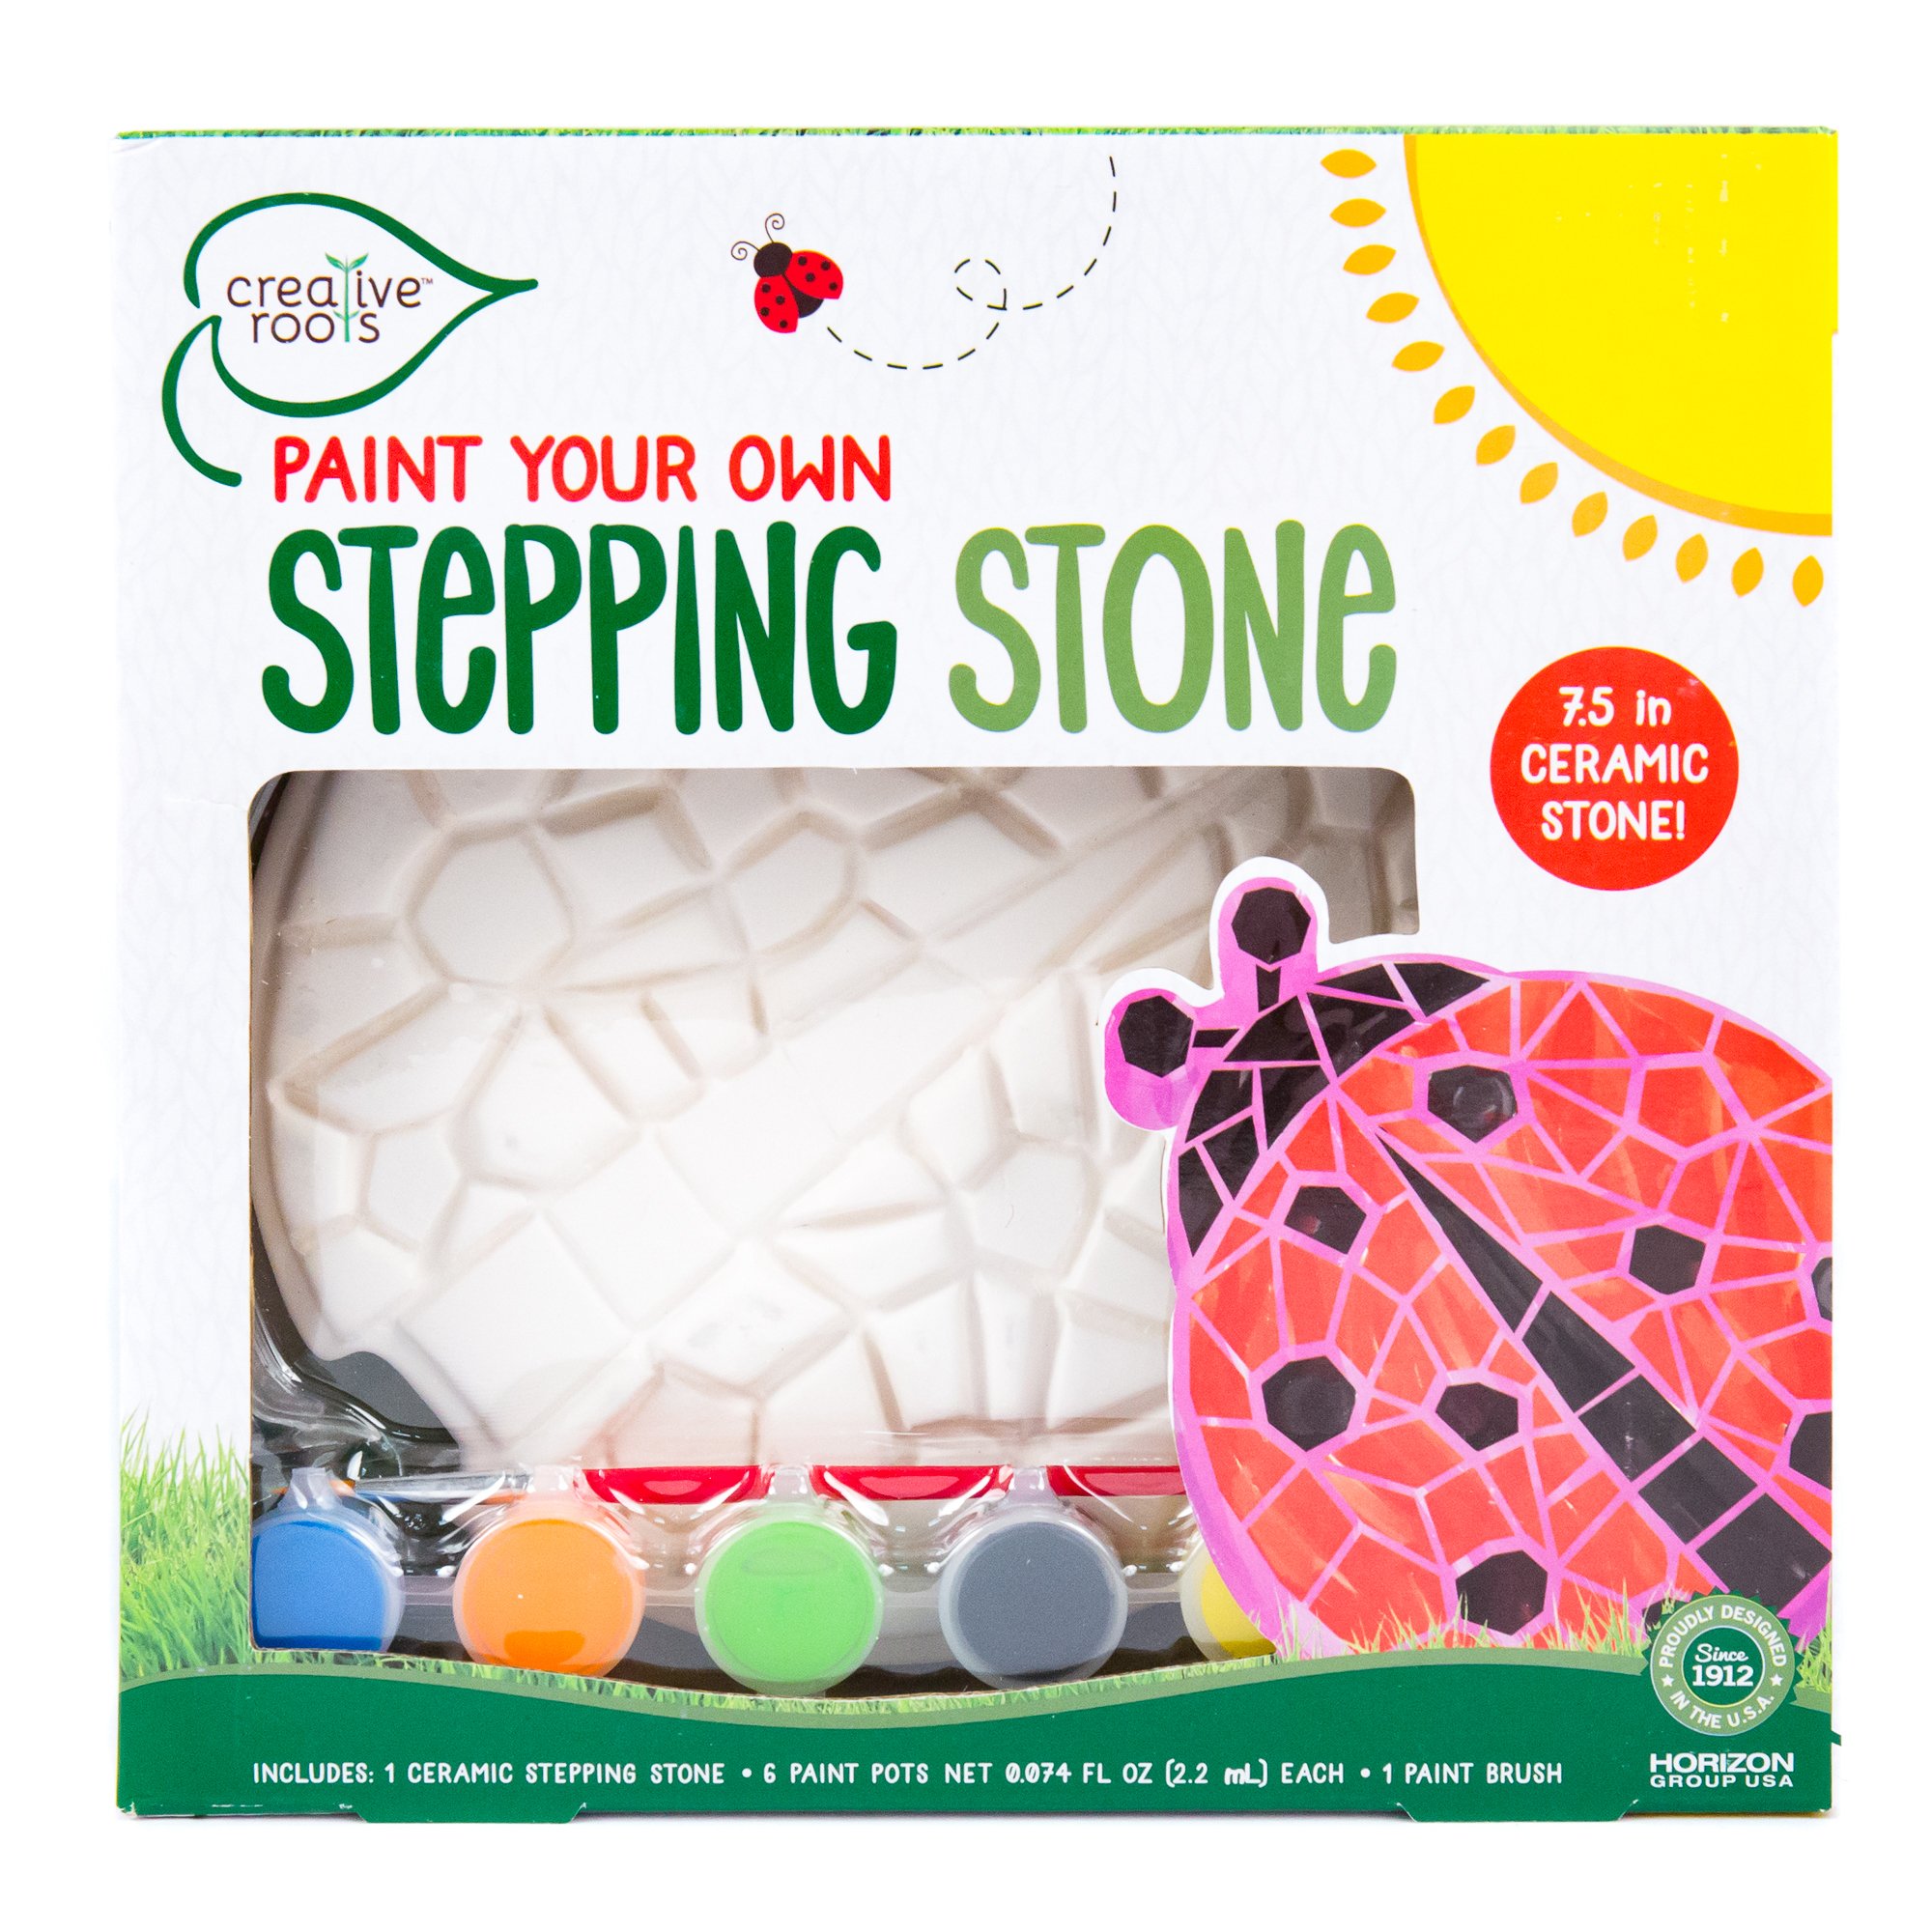 Creative Roots Mosaic Ladybug Stone, Includes 7-Inch Ceramic Stepping Stone & 6 Vibrant Paints, DIY Garden Stepping Stone Kit for Kids Ages 6+